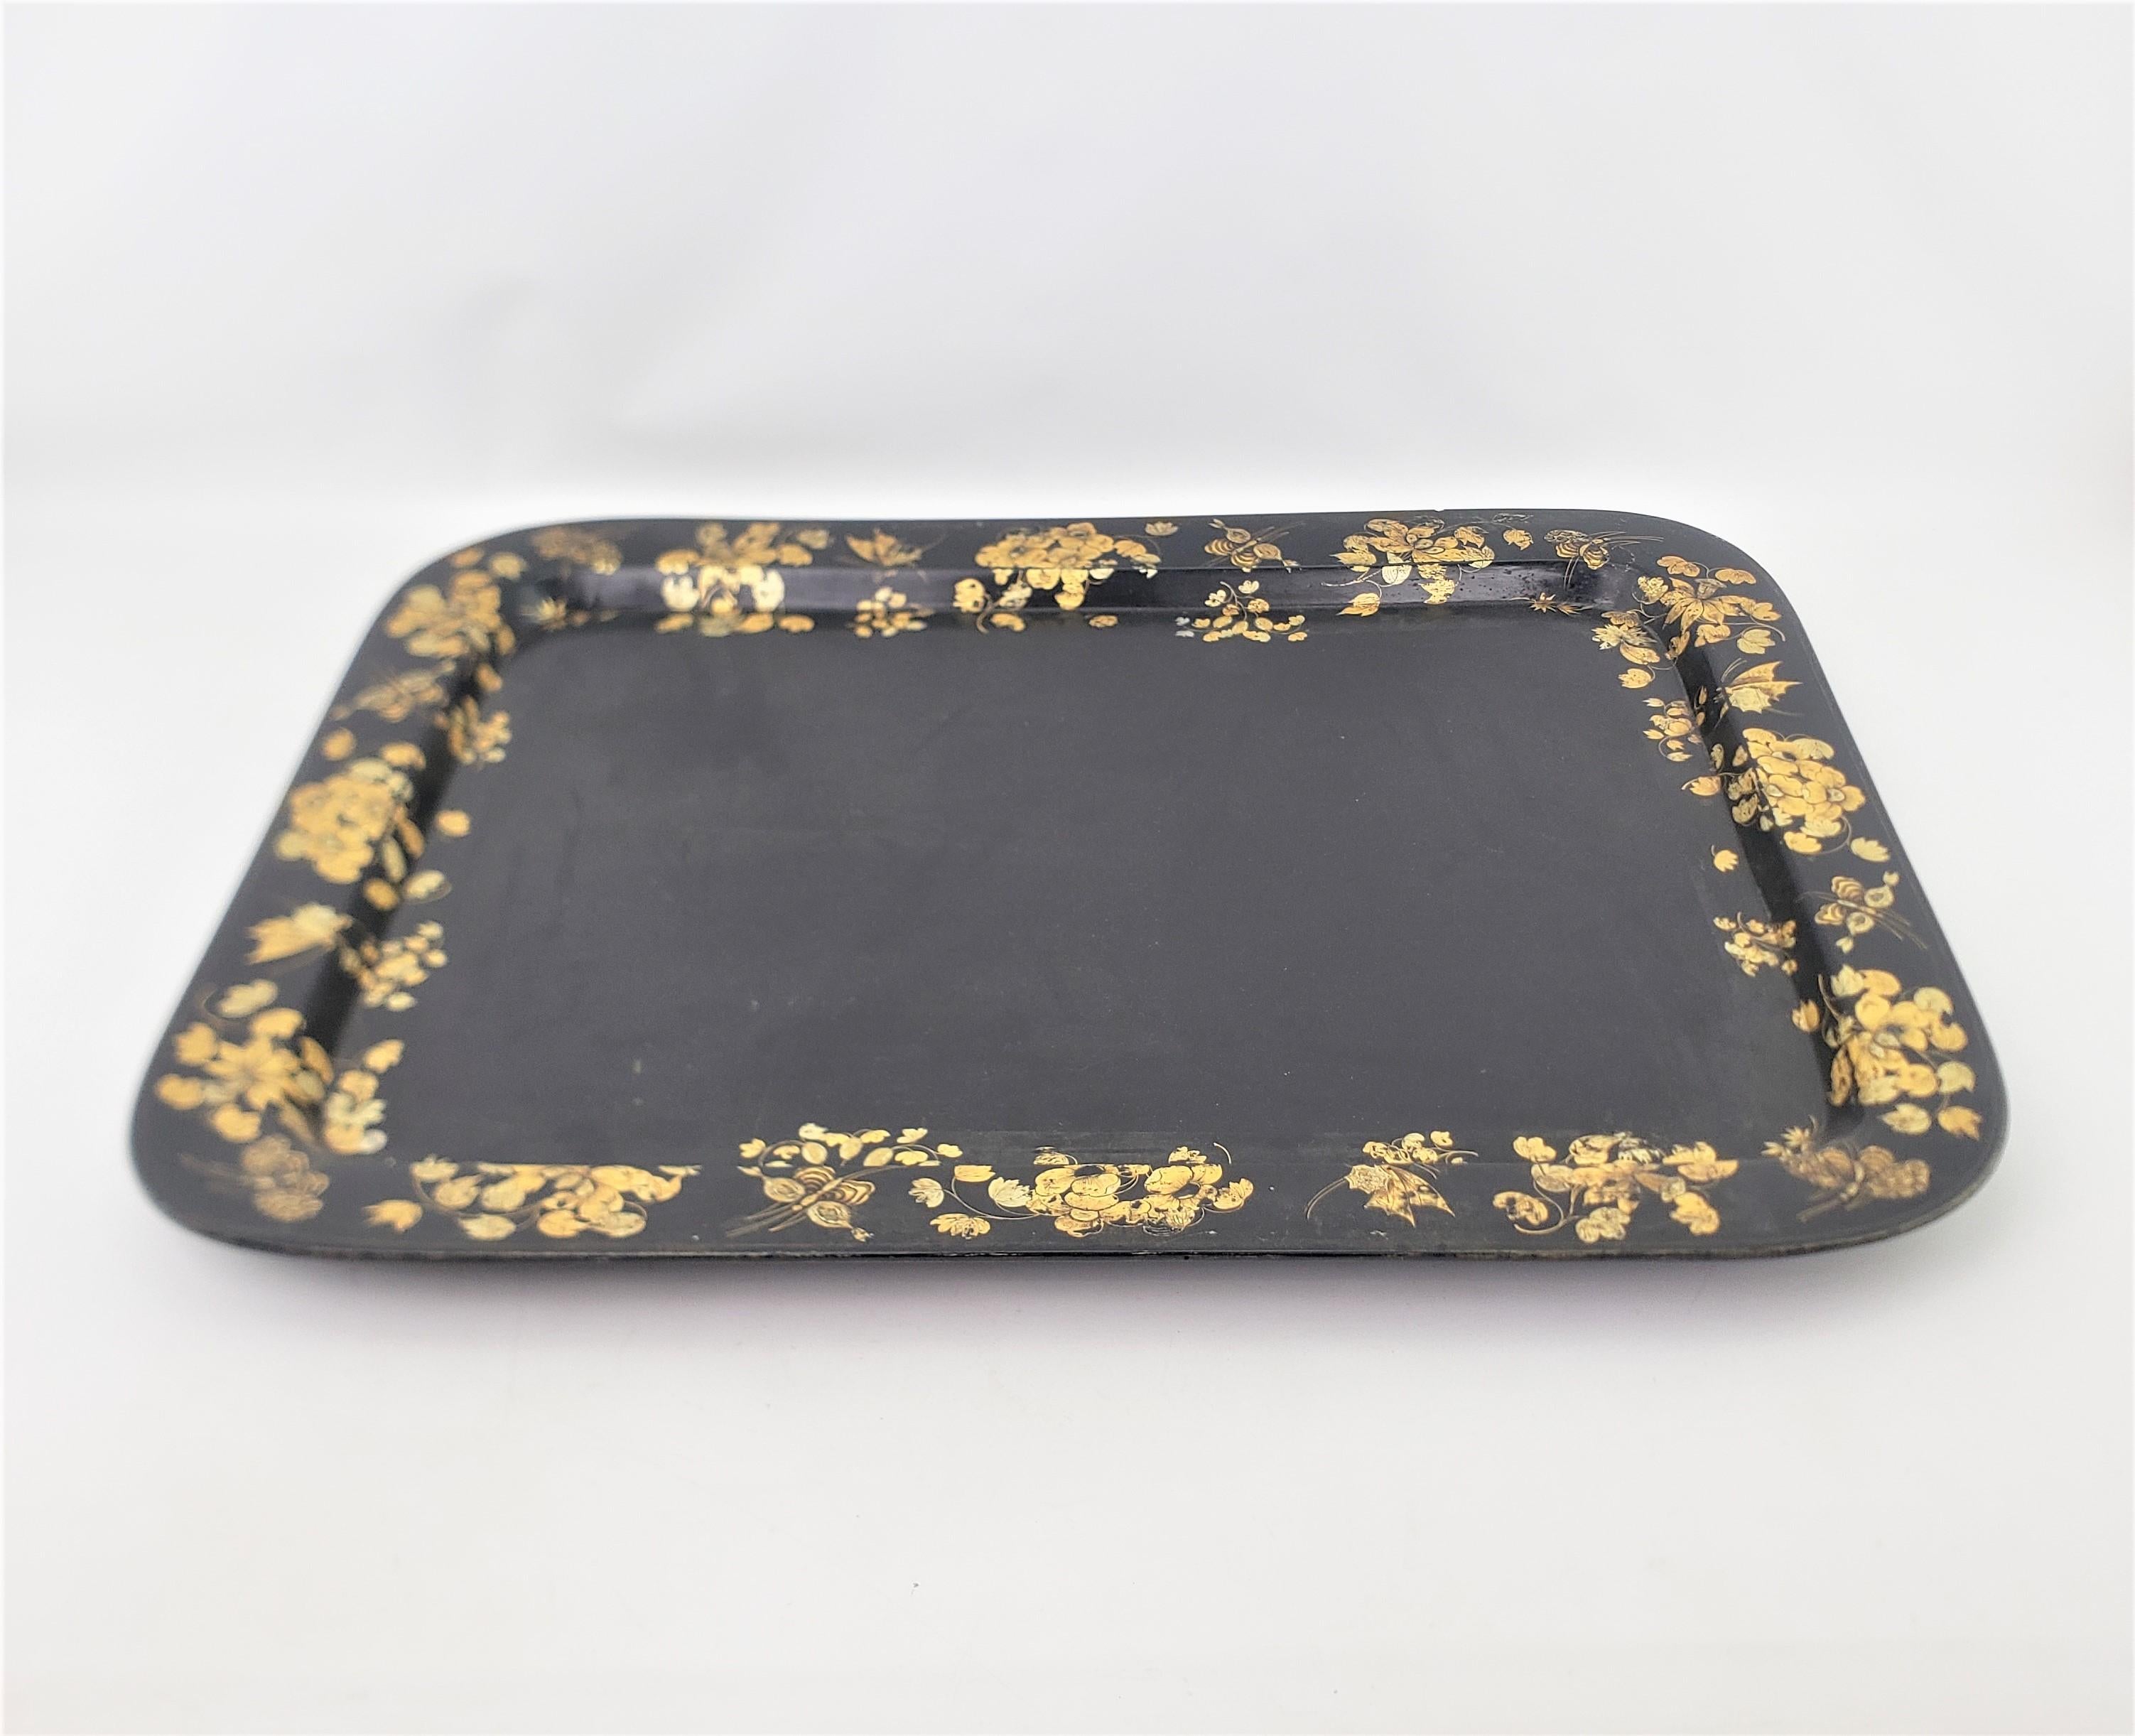 Large Antique English Paper Mache Serving Tray with Gilt Flowers & Butterflies In Good Condition For Sale In Hamilton, Ontario